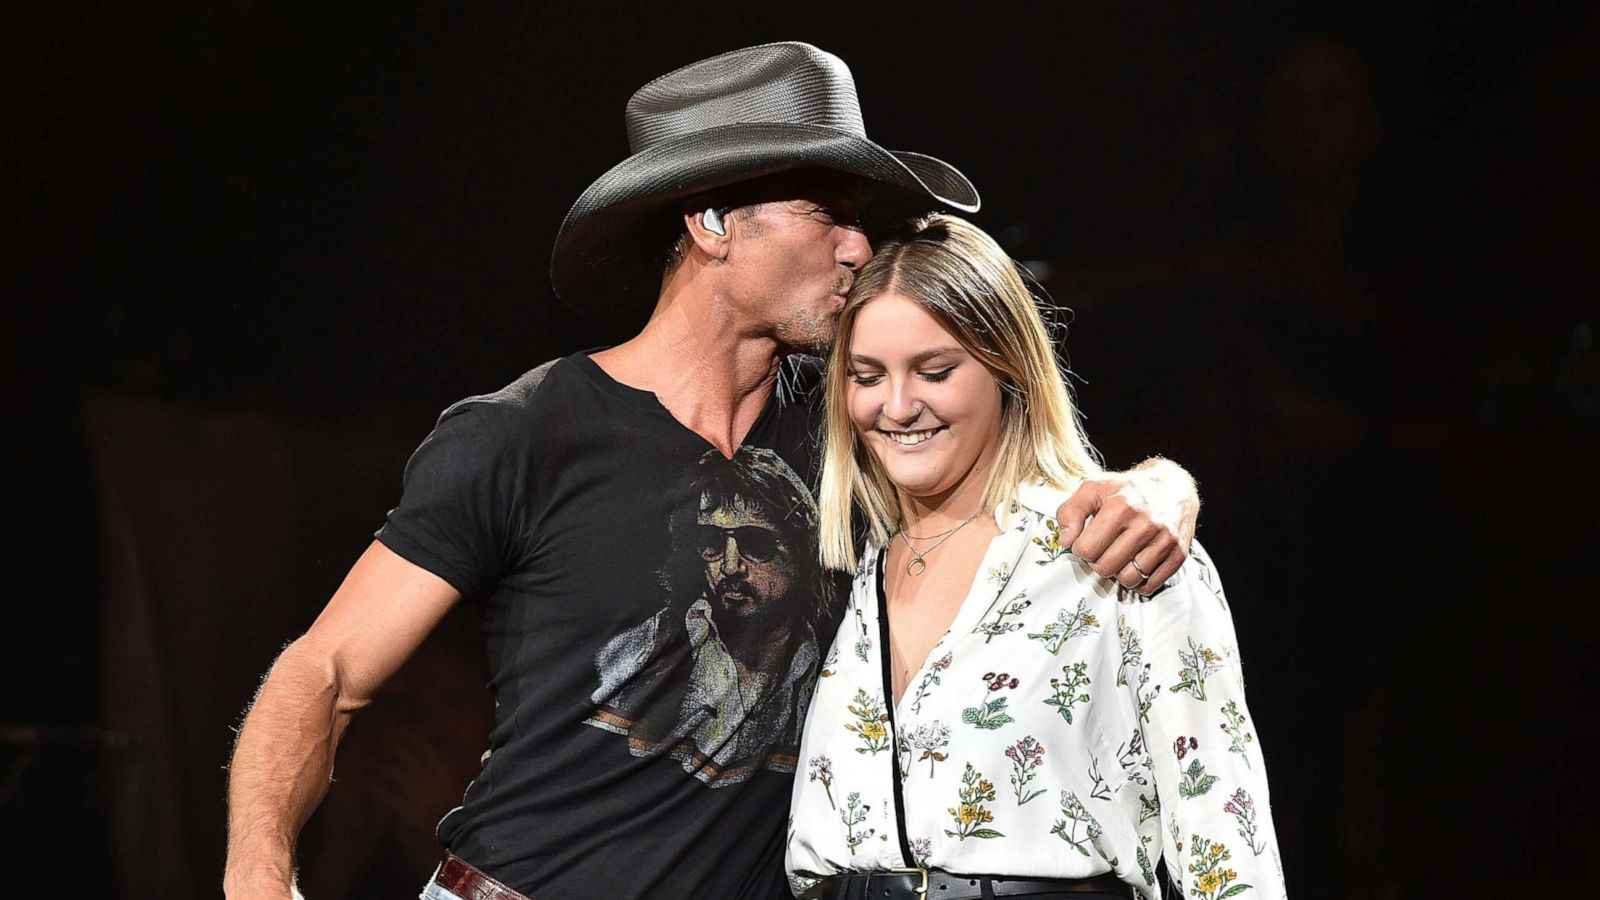 Tim McGraw receives backlash after being onstage with his daughter and Faith Hill.